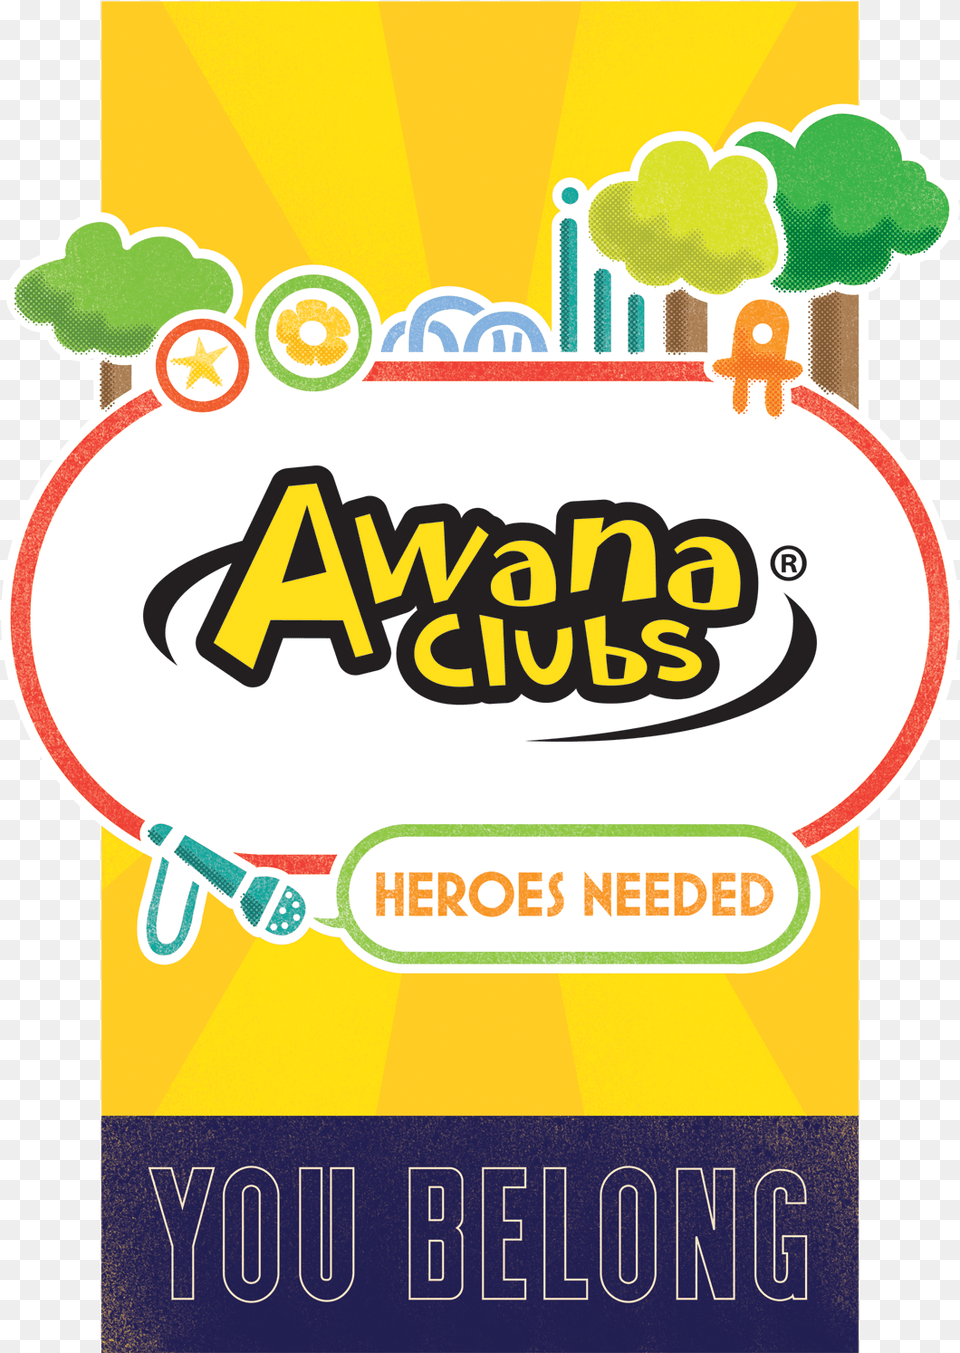 Welcome To Tbc Awana Clubs, Advertisement, Poster Png